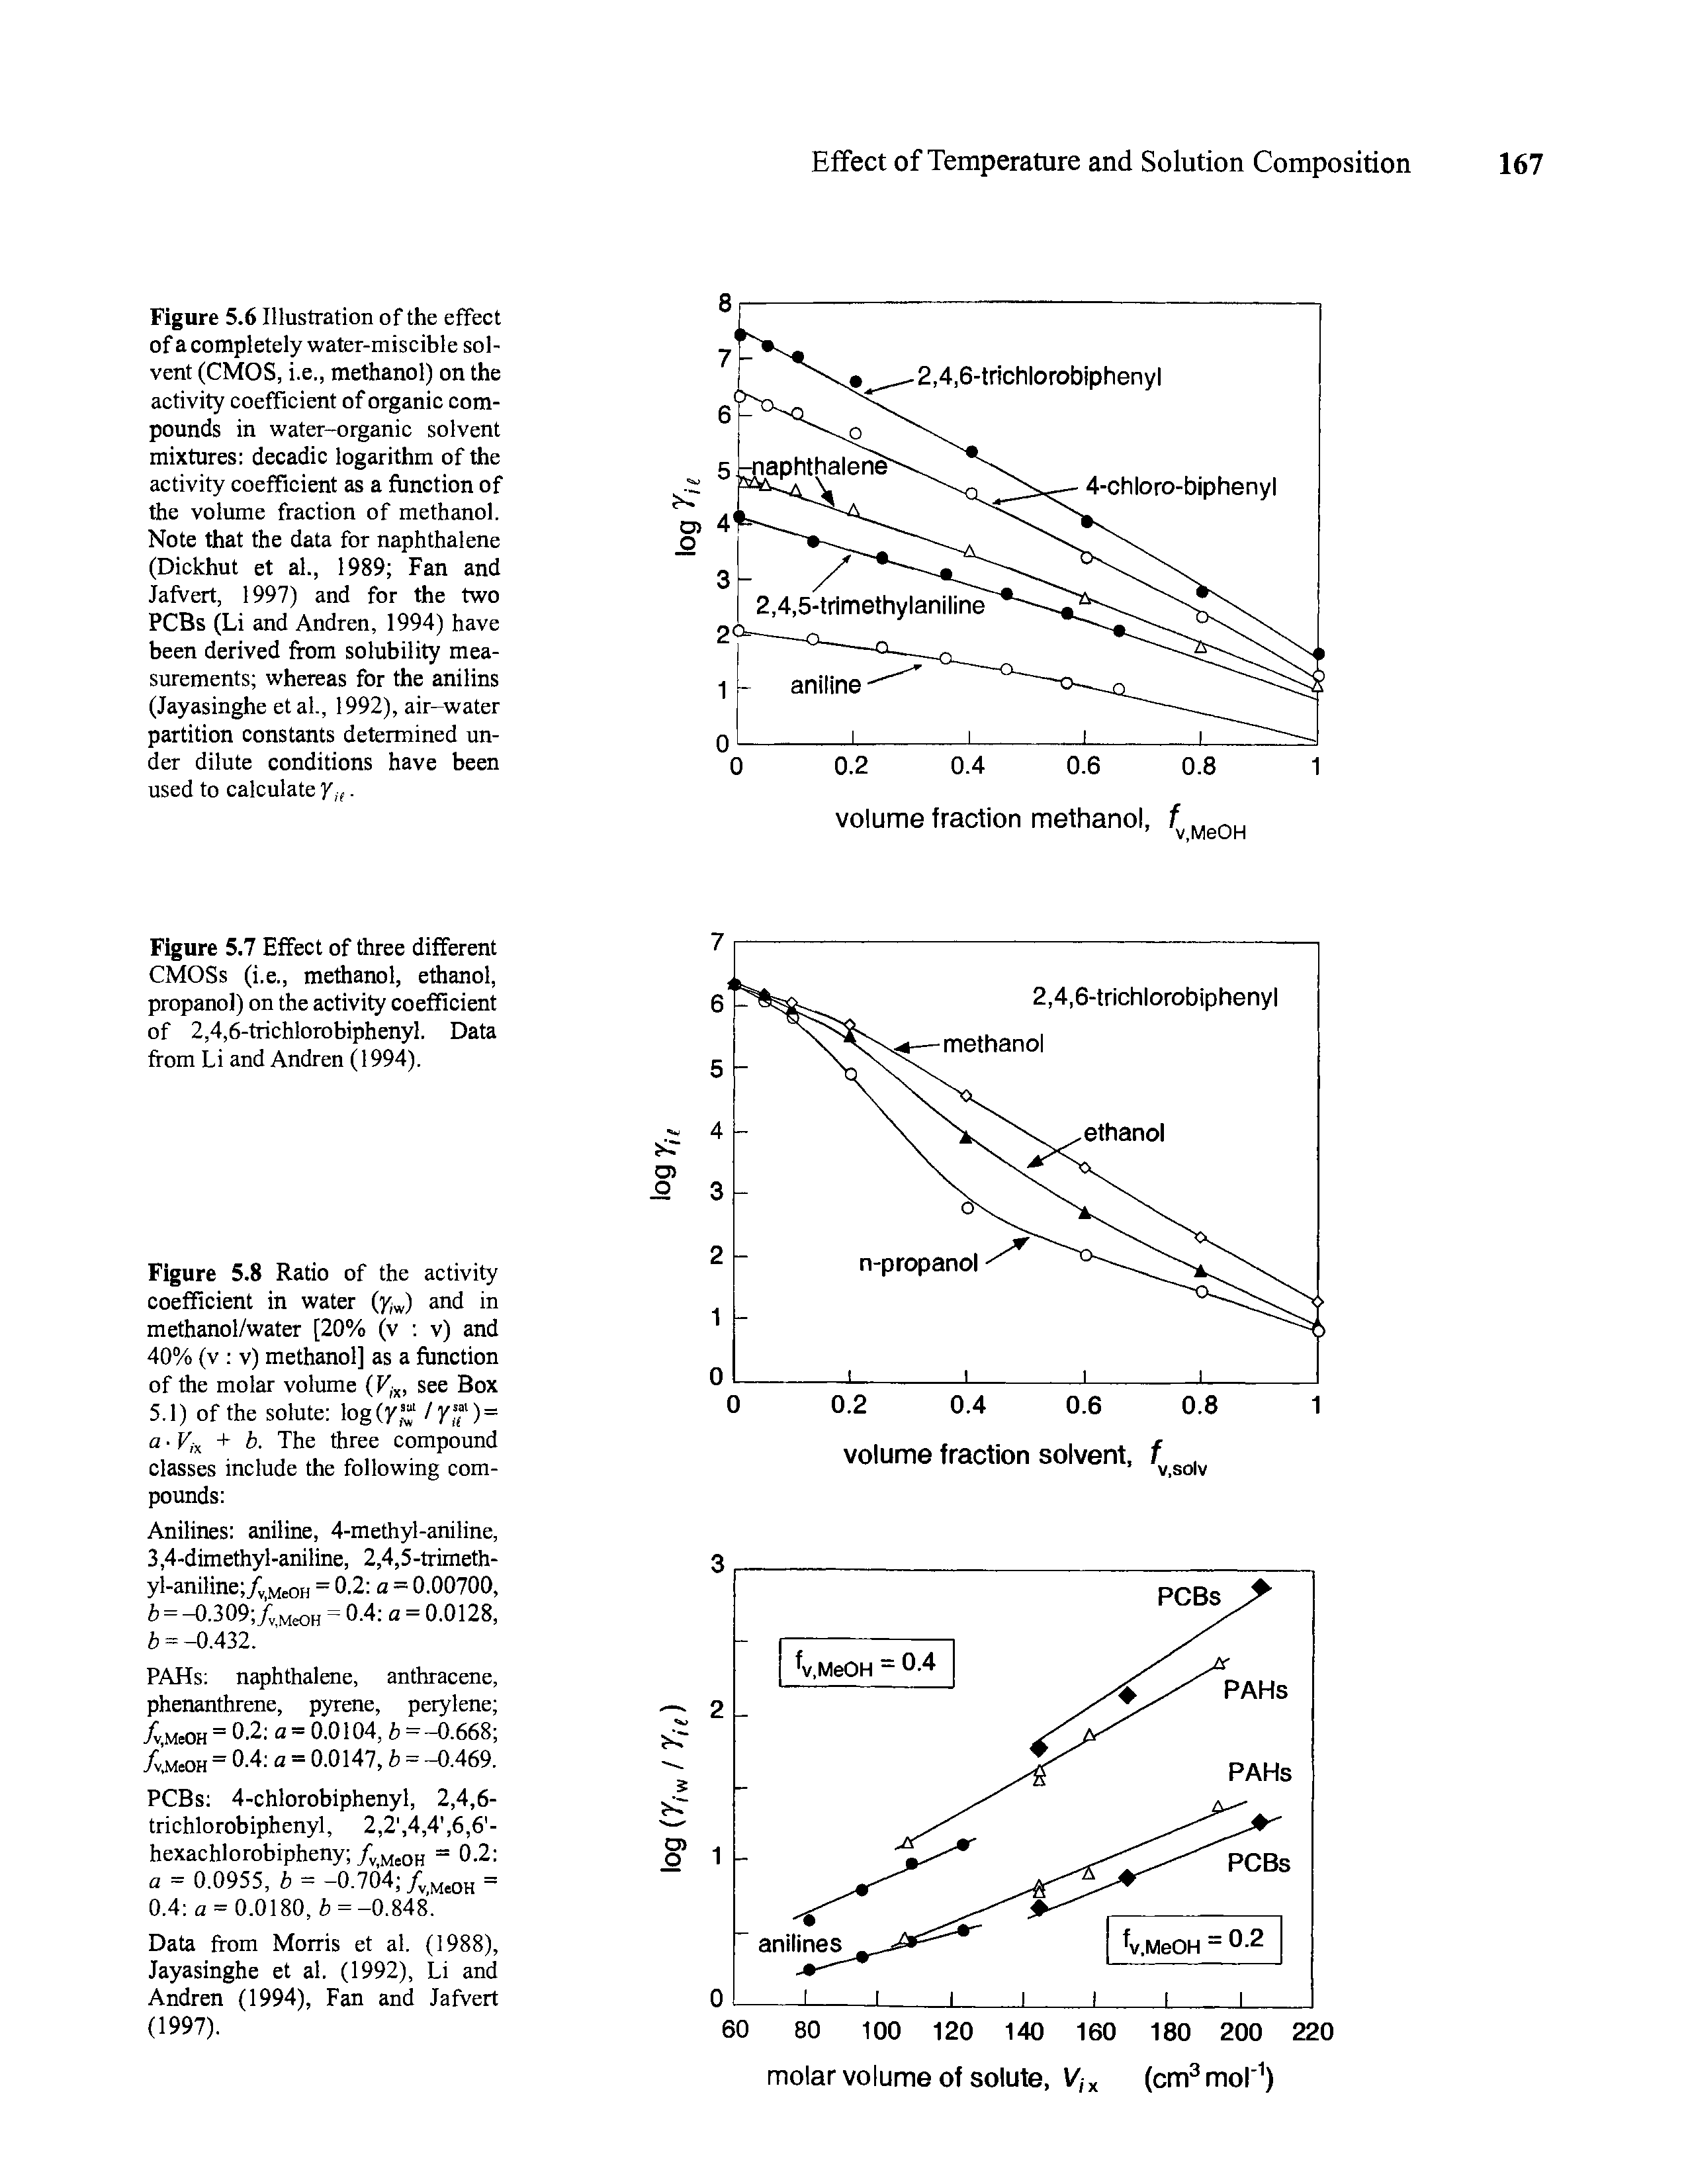 Figure 5.8 Ratio of the activity coefficient in water (y/w) and in methanol/water [20% (v v) and 40% (v v) methanol] as a function of the molar volume (Vix, see Box 5.1) of the solute log(y // ) = a Vix + b. The three compound classes include the following compounds ...